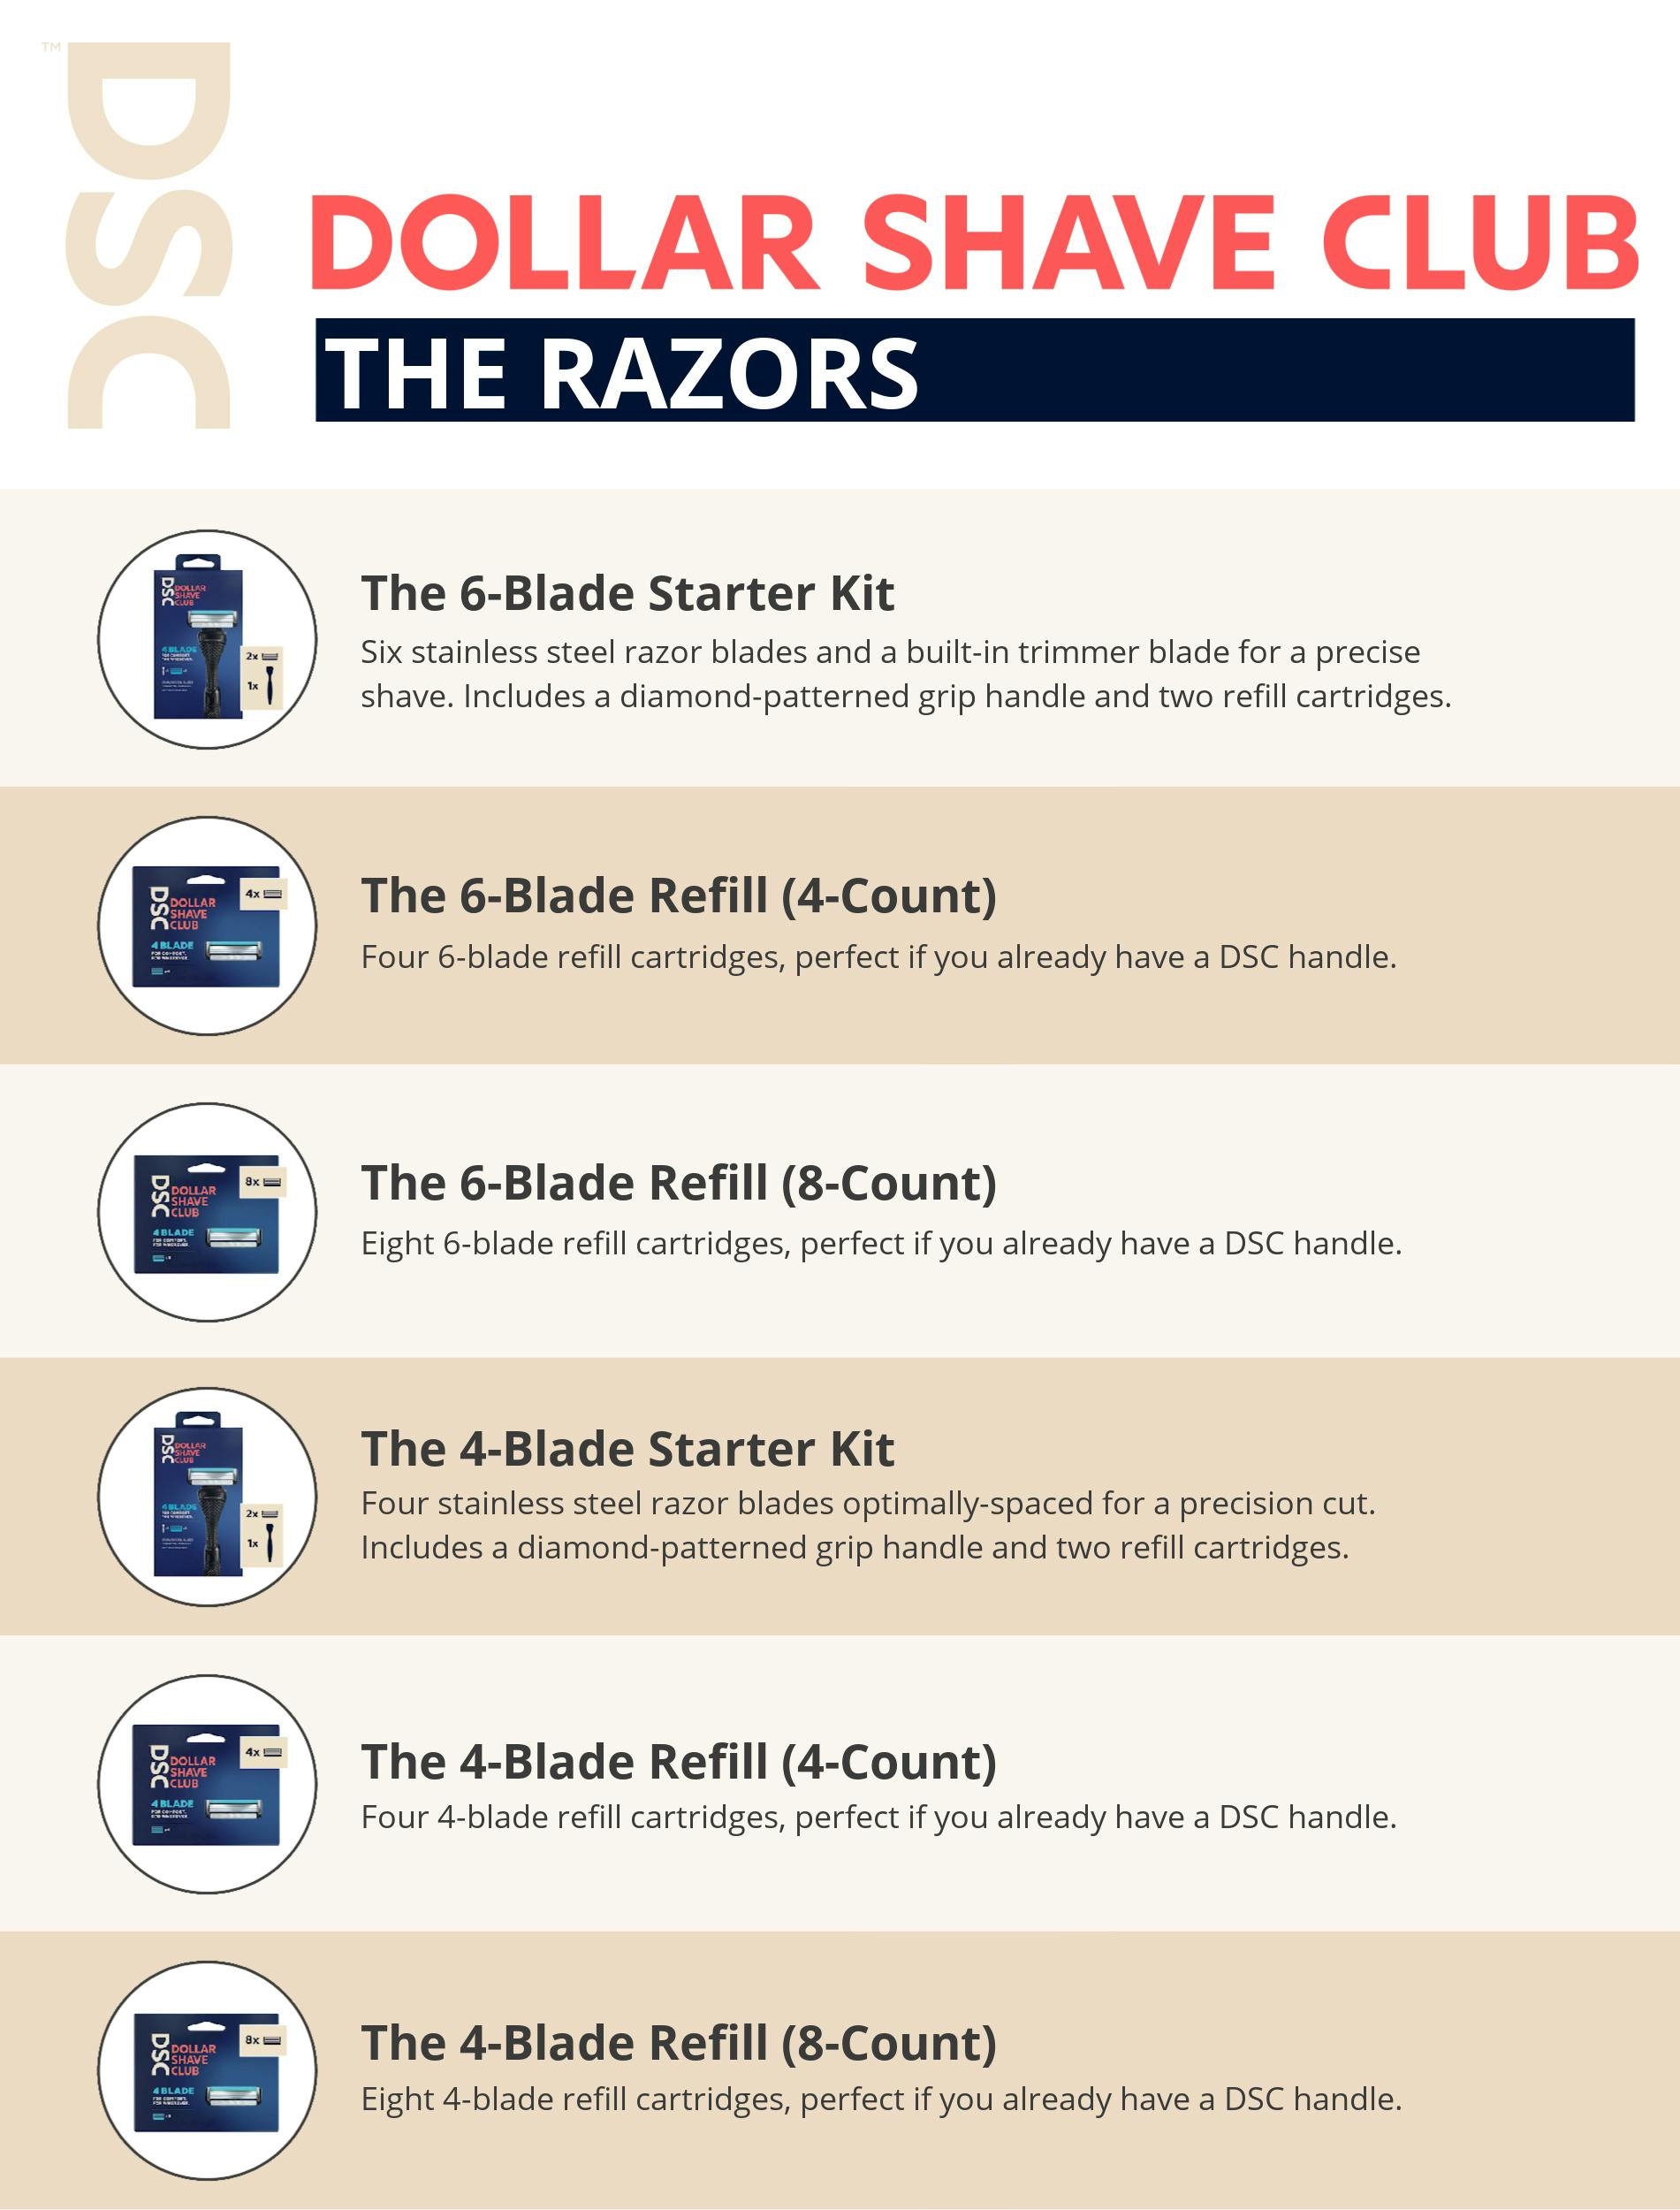 An infographic showing a list of Dollar Shave Club's razor products, including the 6-blade and 4-blade starter kit and the 6-blade and 4-blade refill cartridges